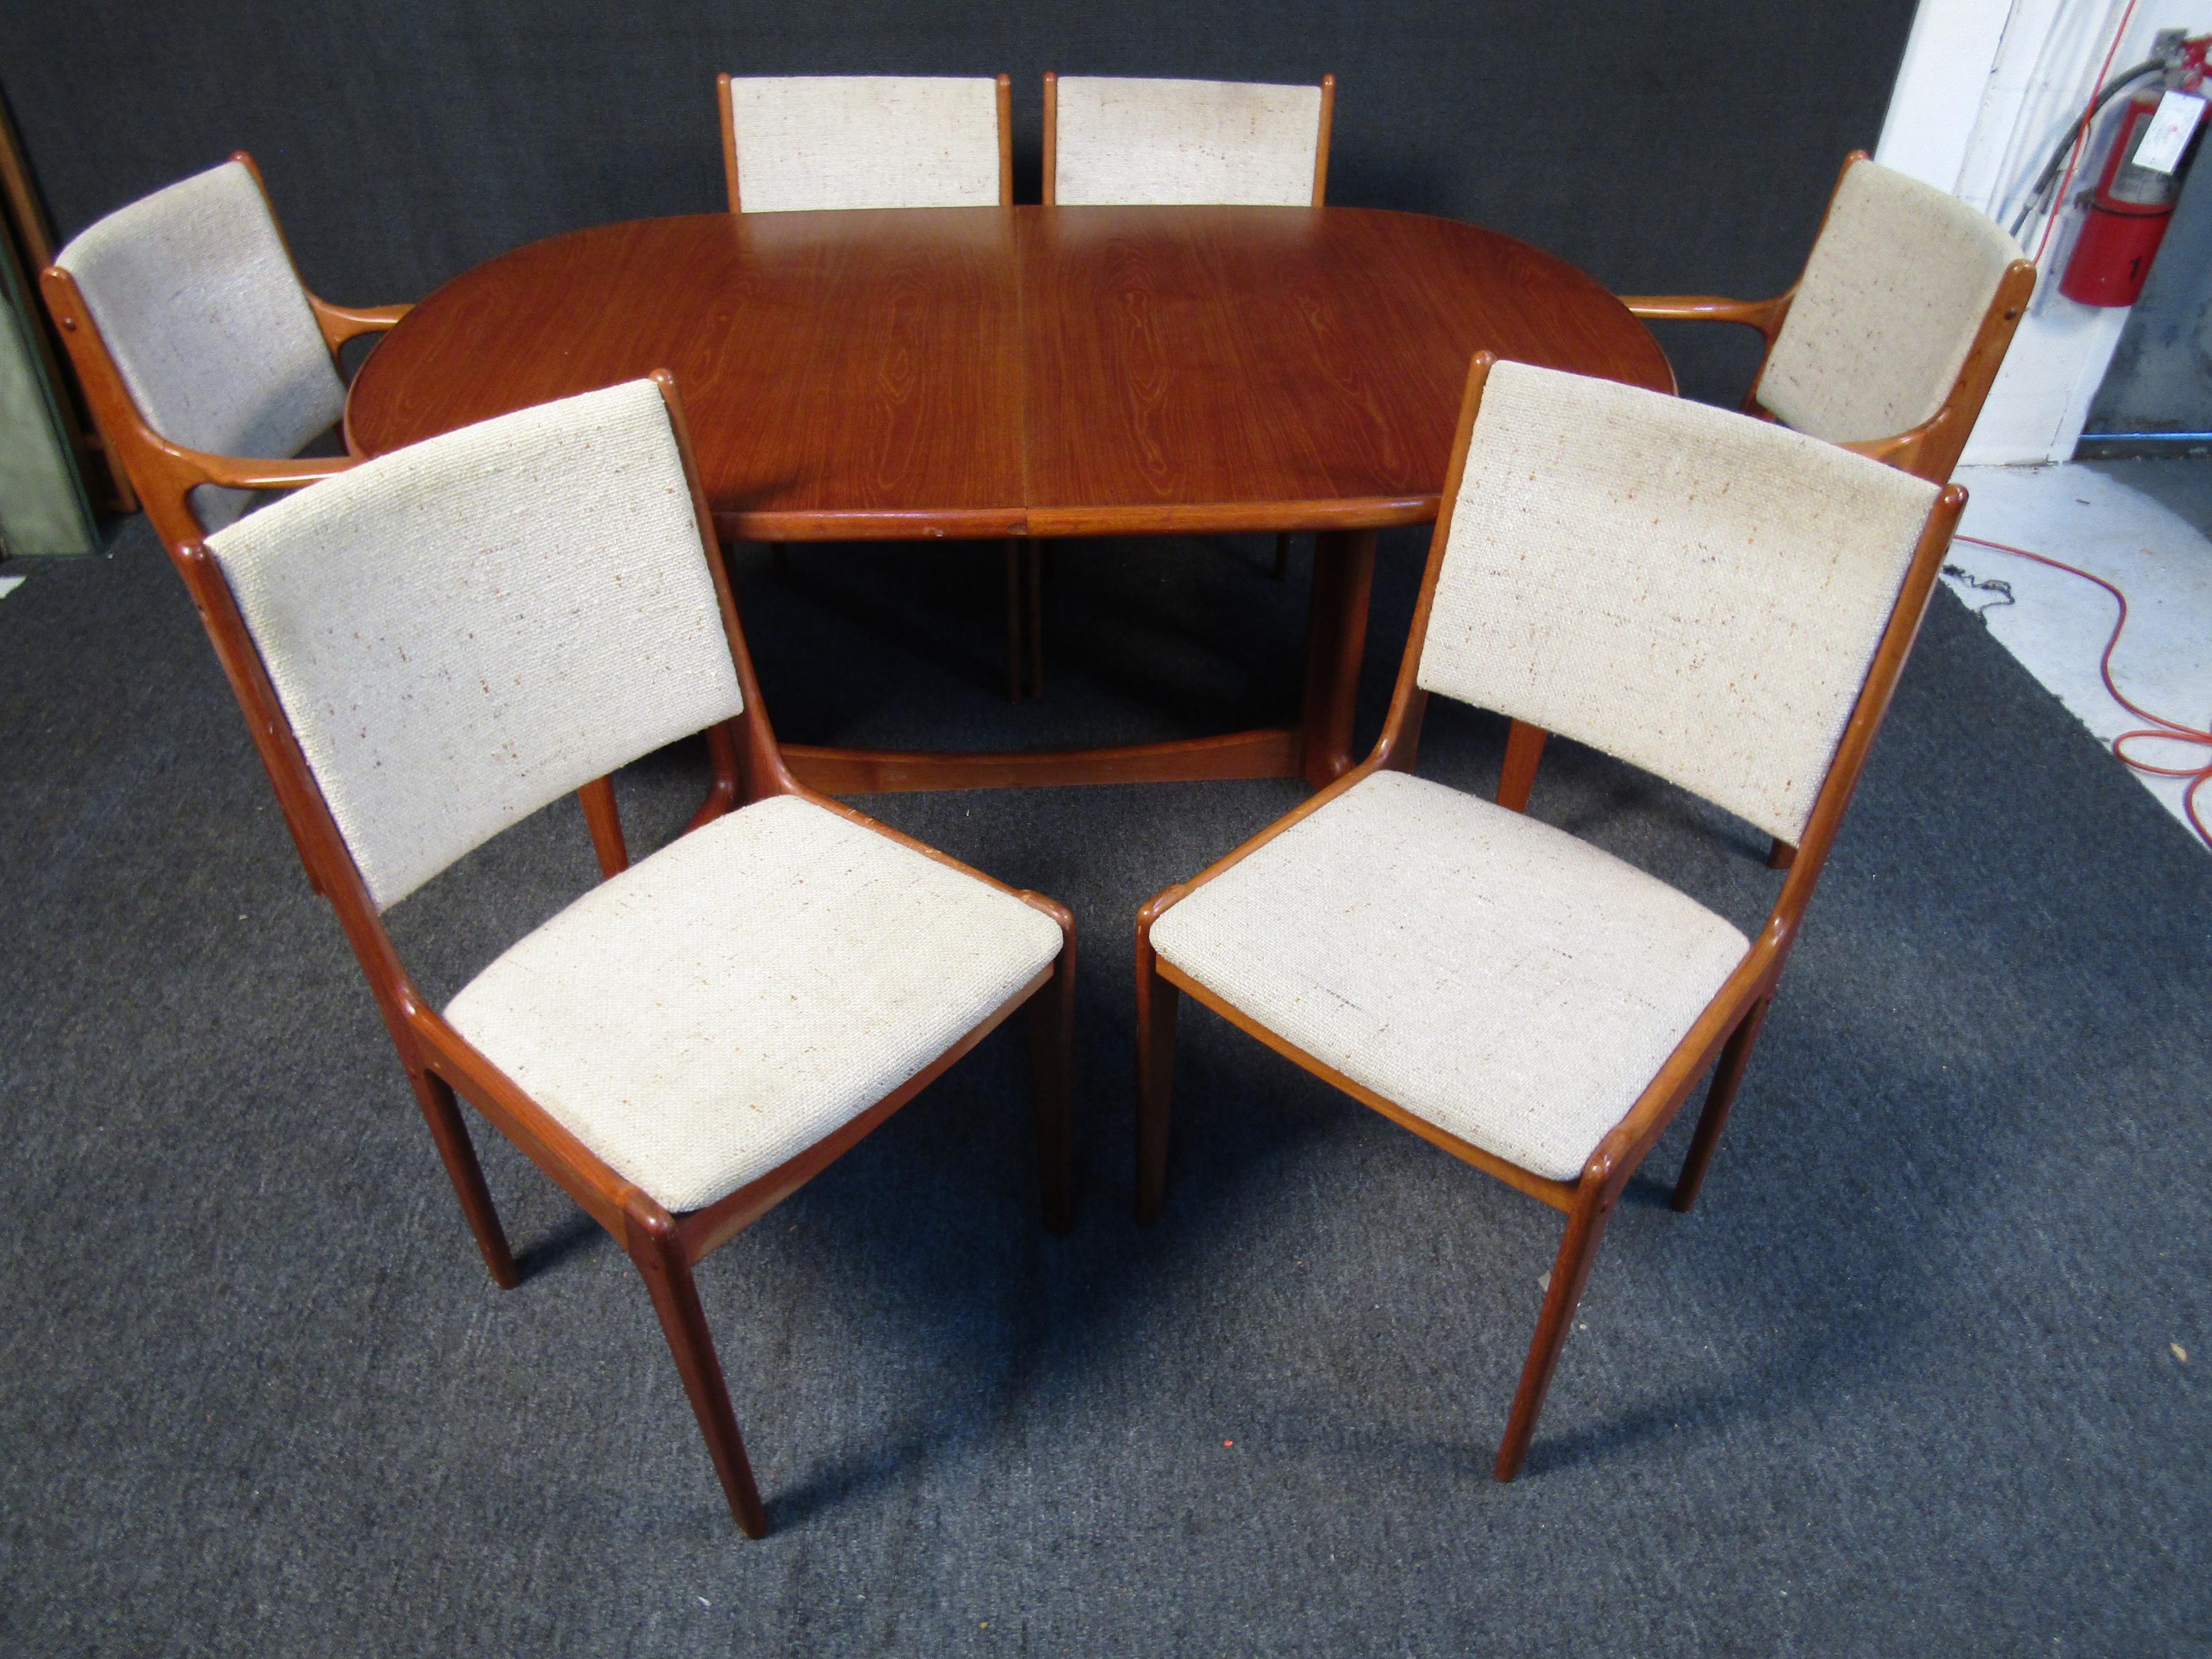 This vintage dining set by Scandinavian Woodworks Co. includes an expanding dining table with a large center leaf, two armchairs, and six dining chairs. The dining table comes with a glass topper to protect the rich teak woodgrain that makes this